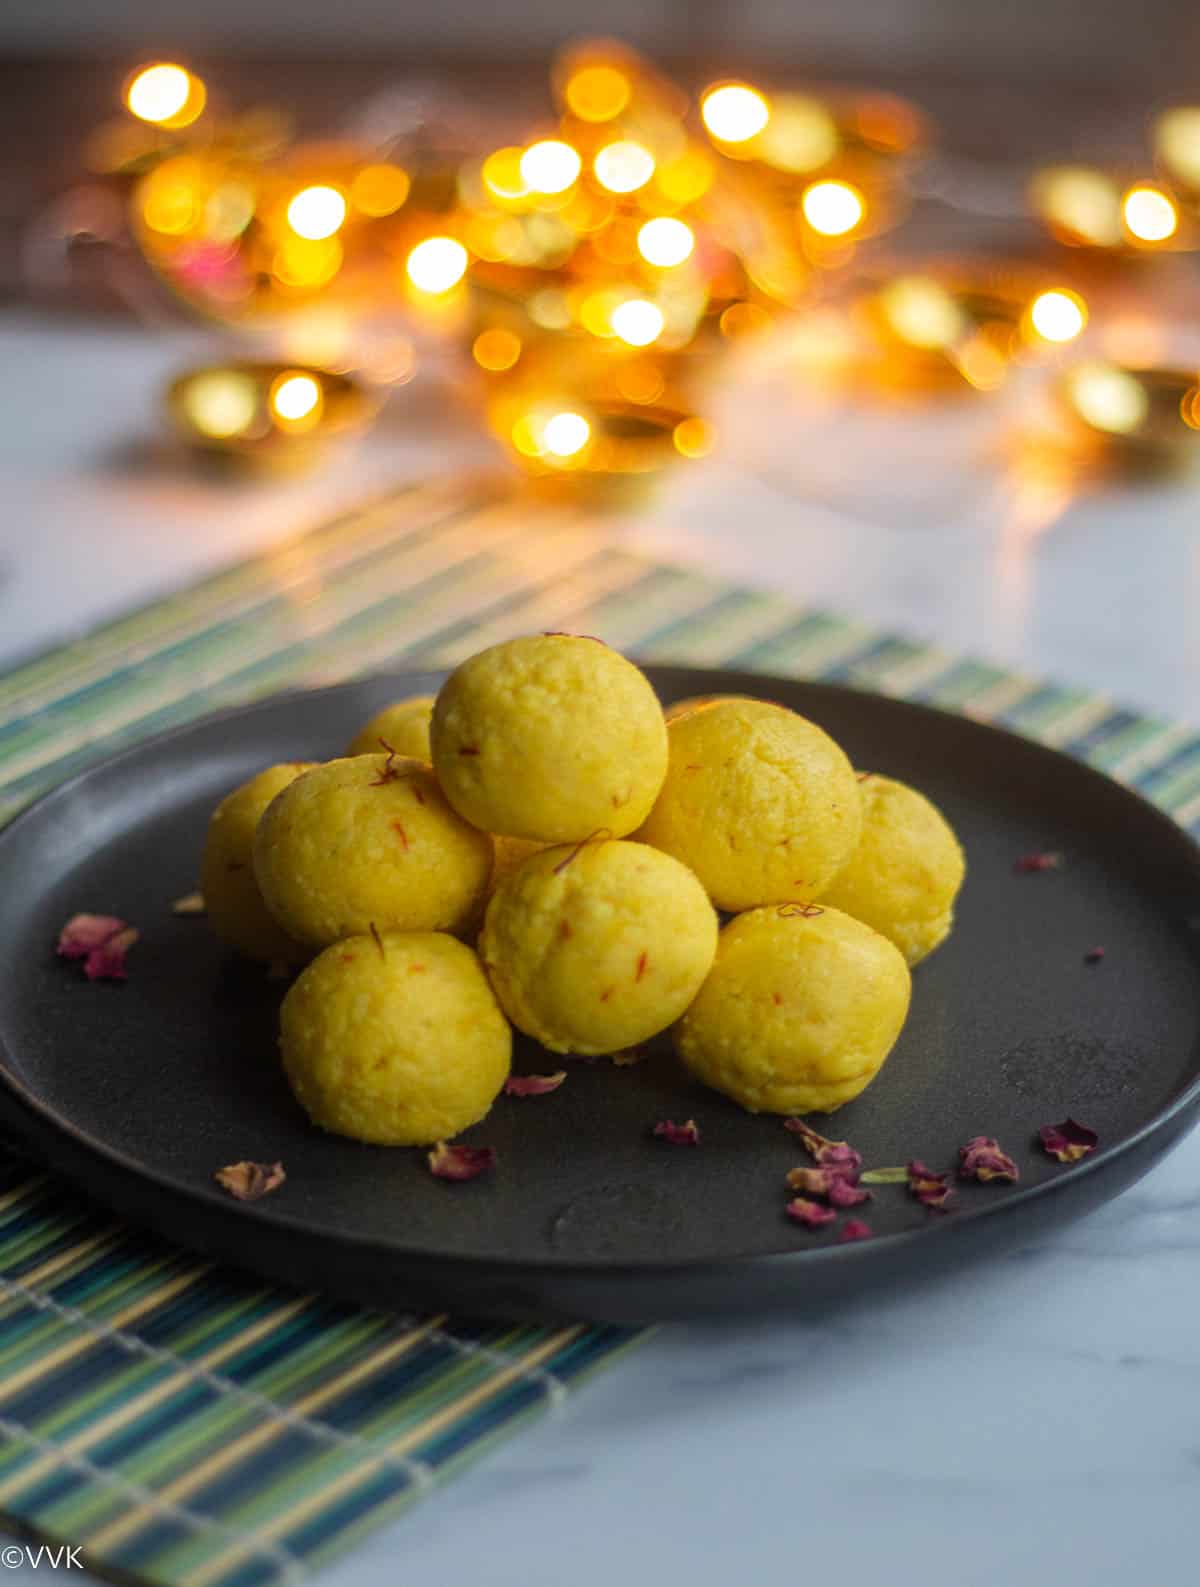 paneer ladoo with light bokeh effect on the background